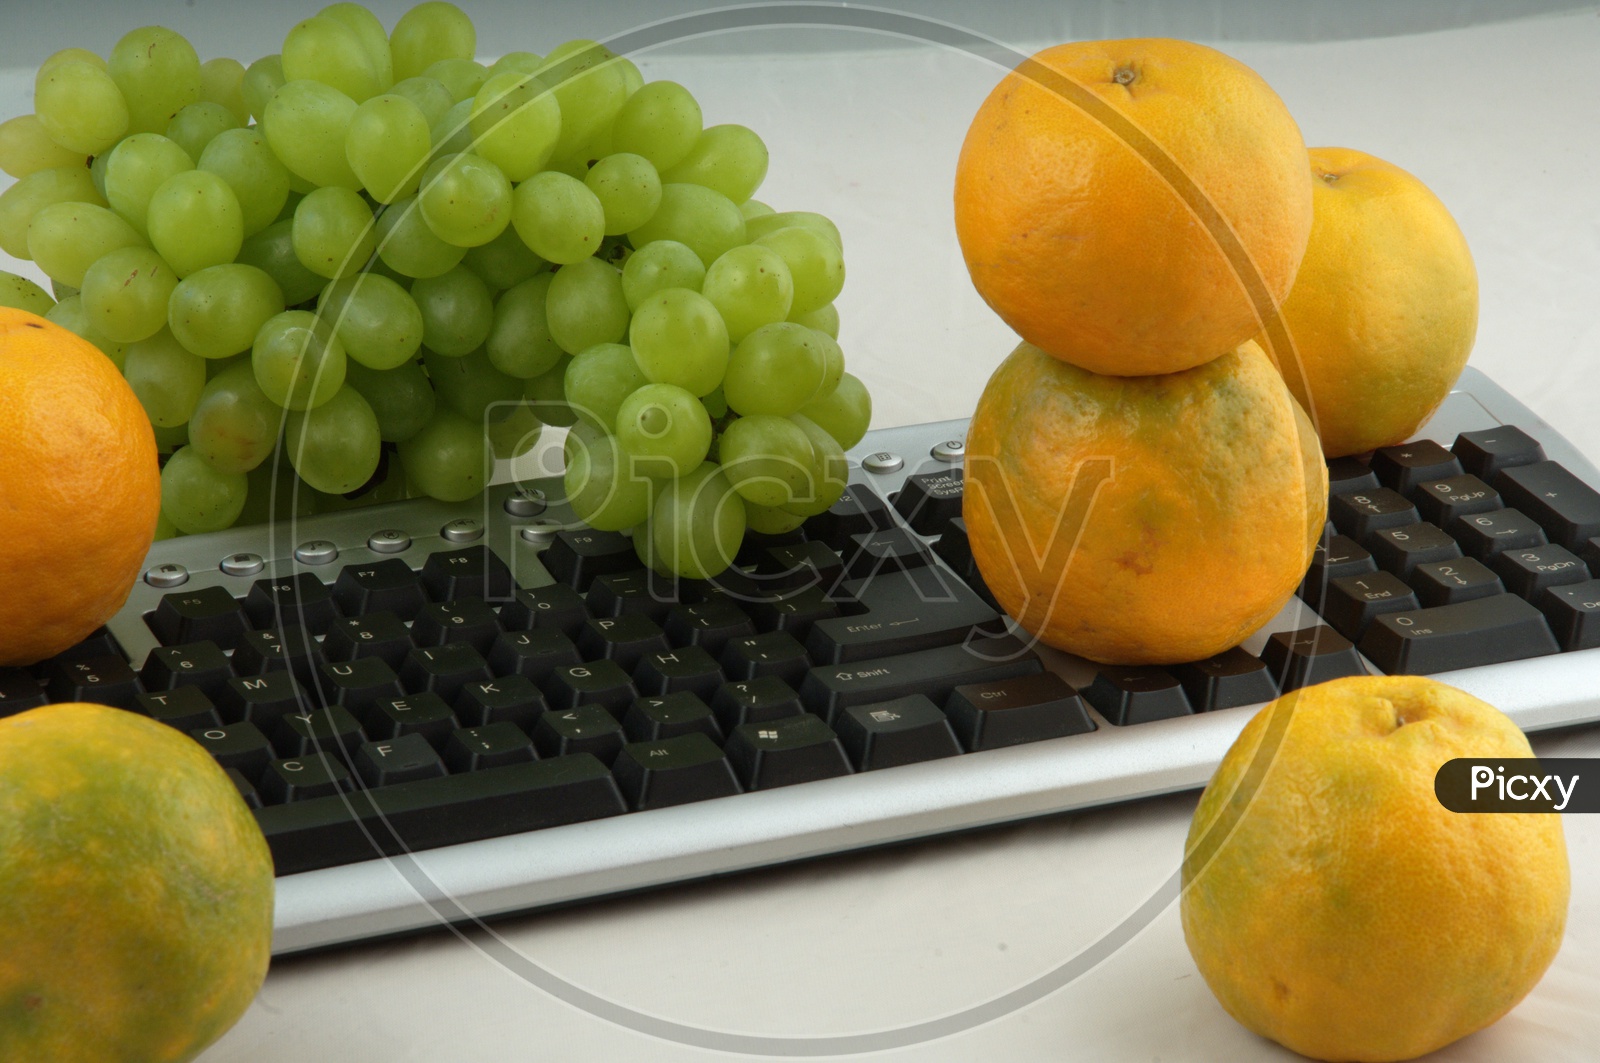 Photographs of oranges and grapes on a computer keyboard